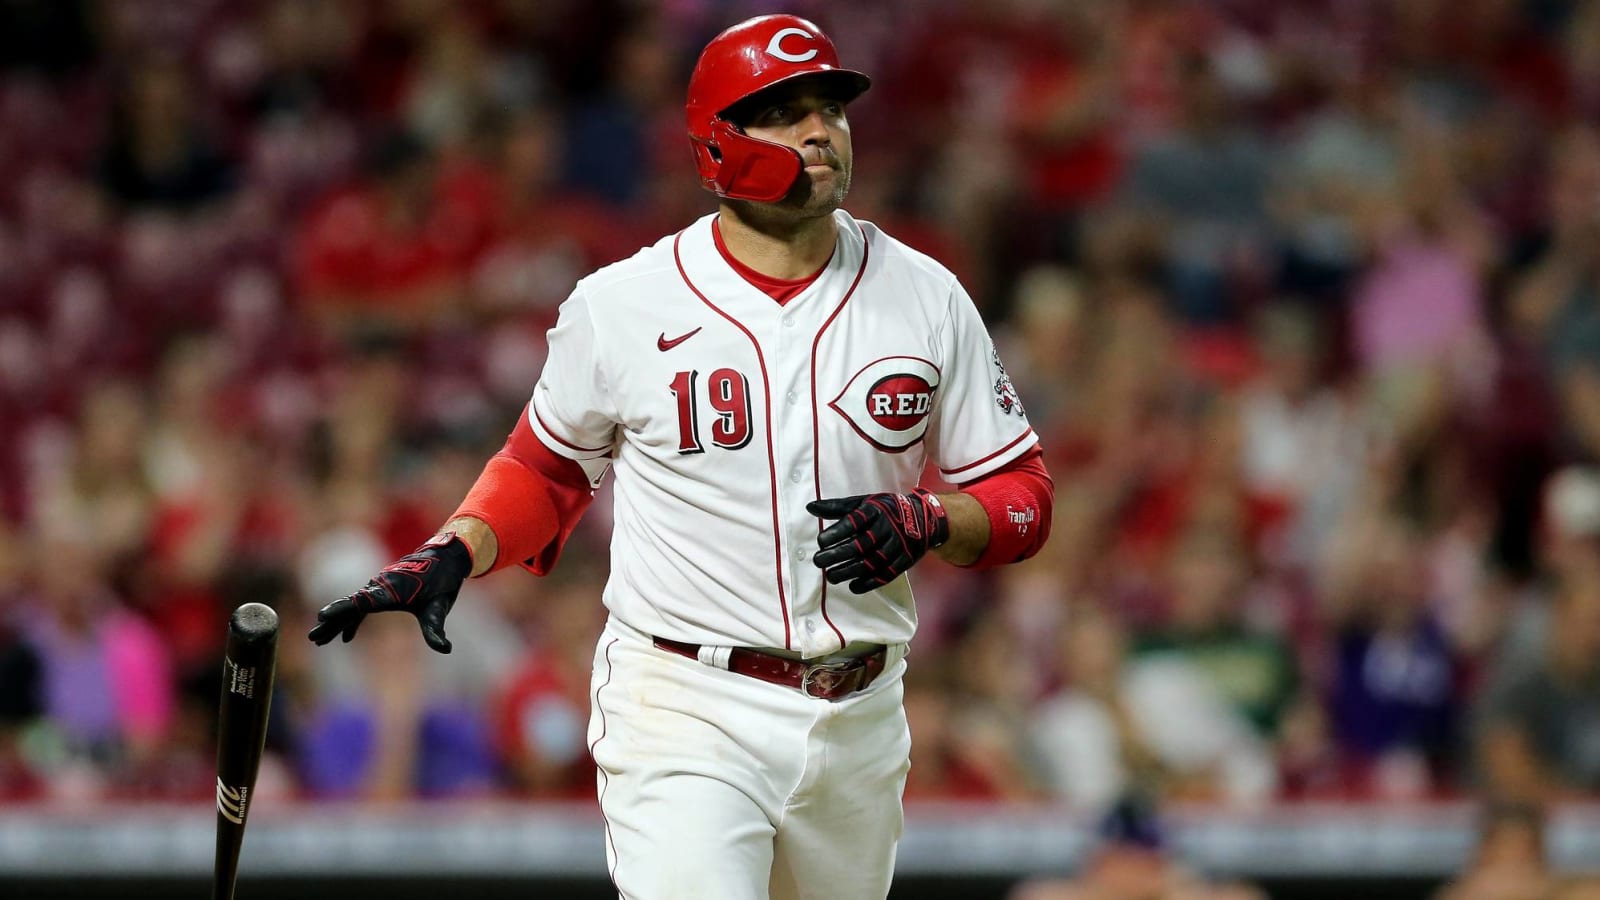 Reds' Joey Votto serves one-game suspension